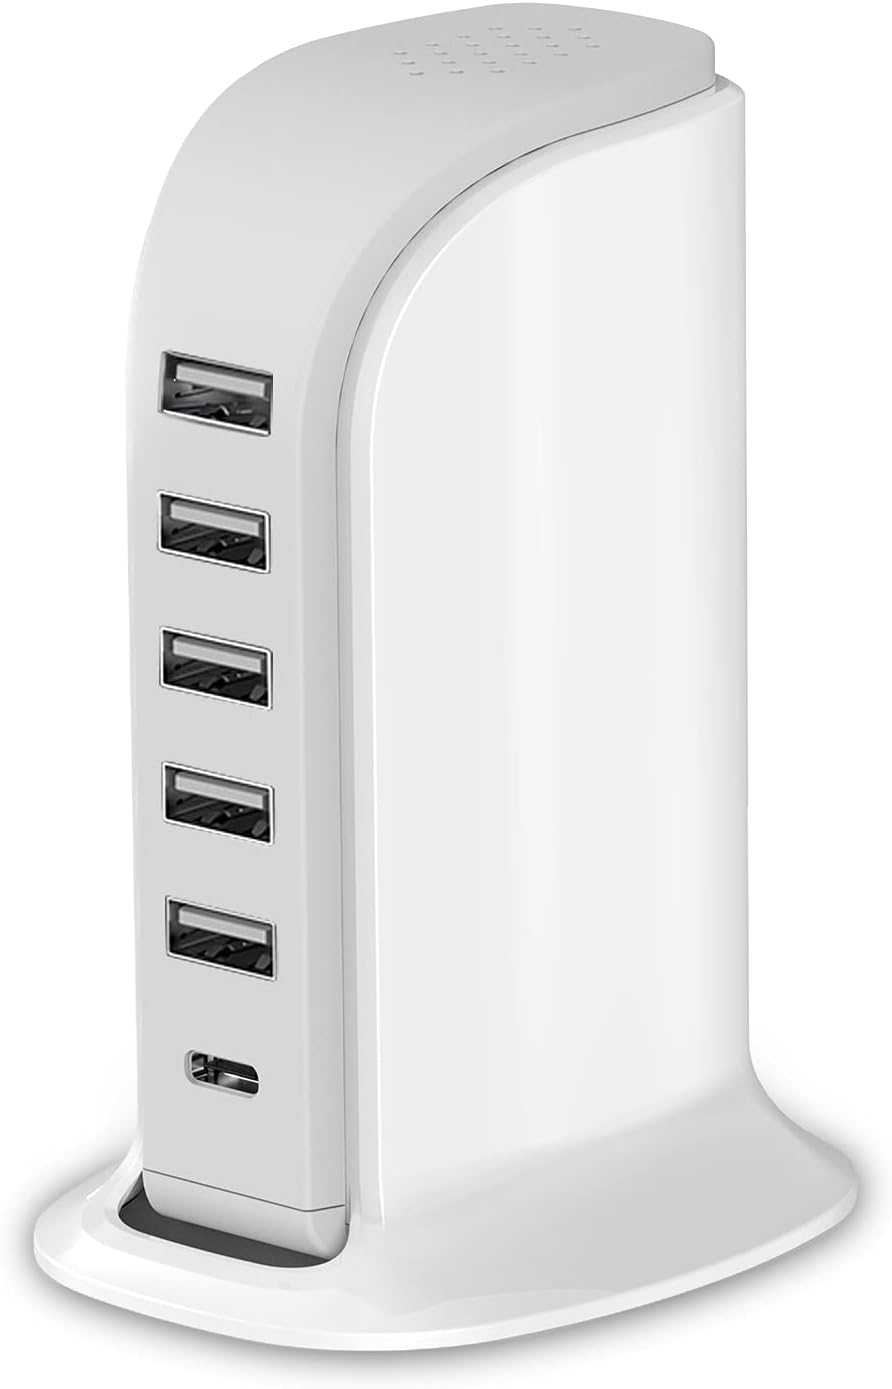 Charging Station for Multiple Devices 40W Upoy, Wall Charger Block 5 USB Ports(Shared 6A), USB Charging Hub Smart IC, Charger Tower with Type-C 3A for iPhone iPad Tablets Smartphones, Home Office Use